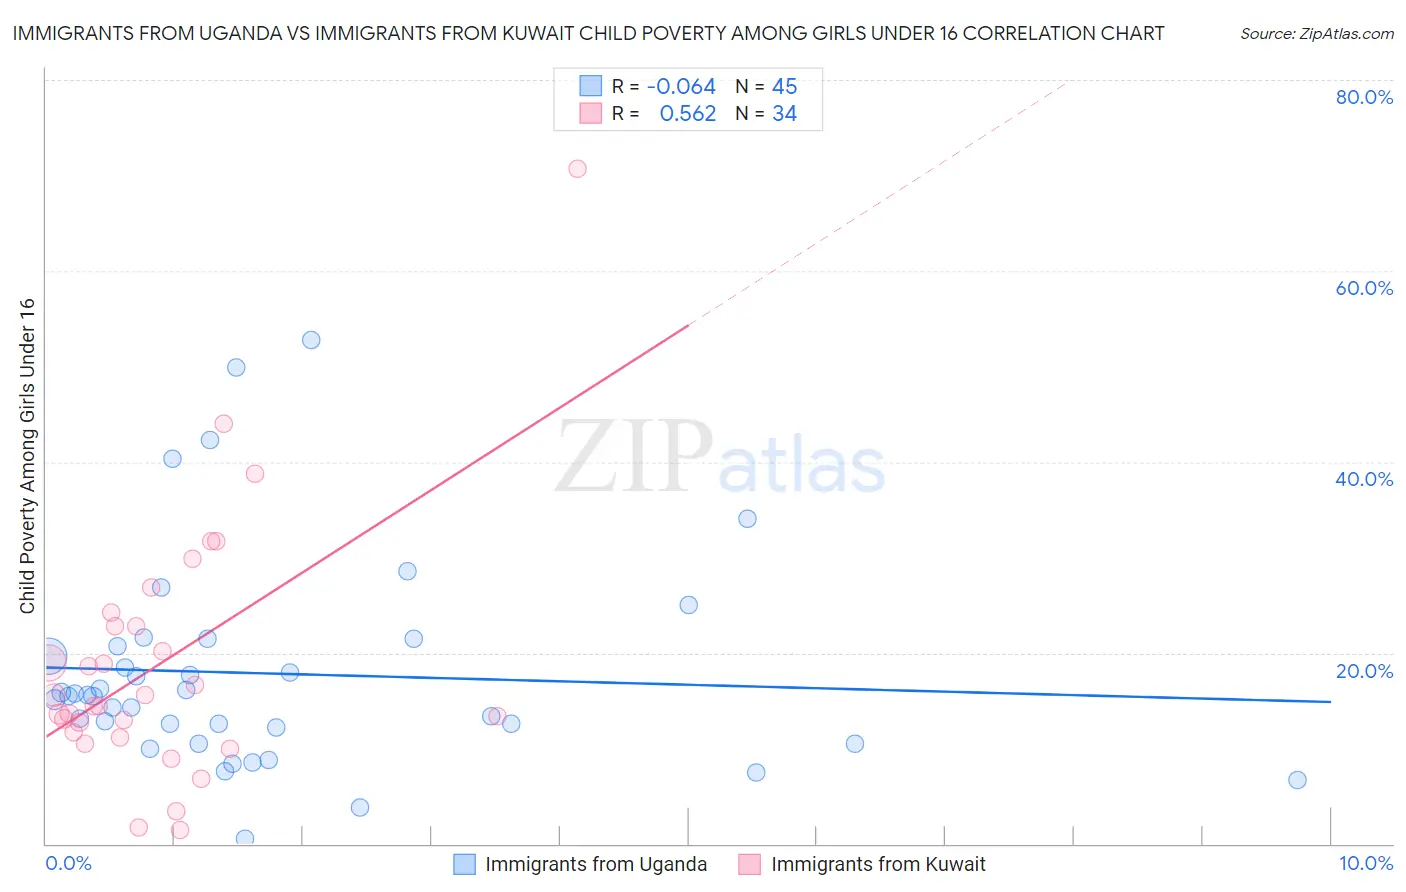 Immigrants from Uganda vs Immigrants from Kuwait Child Poverty Among Girls Under 16